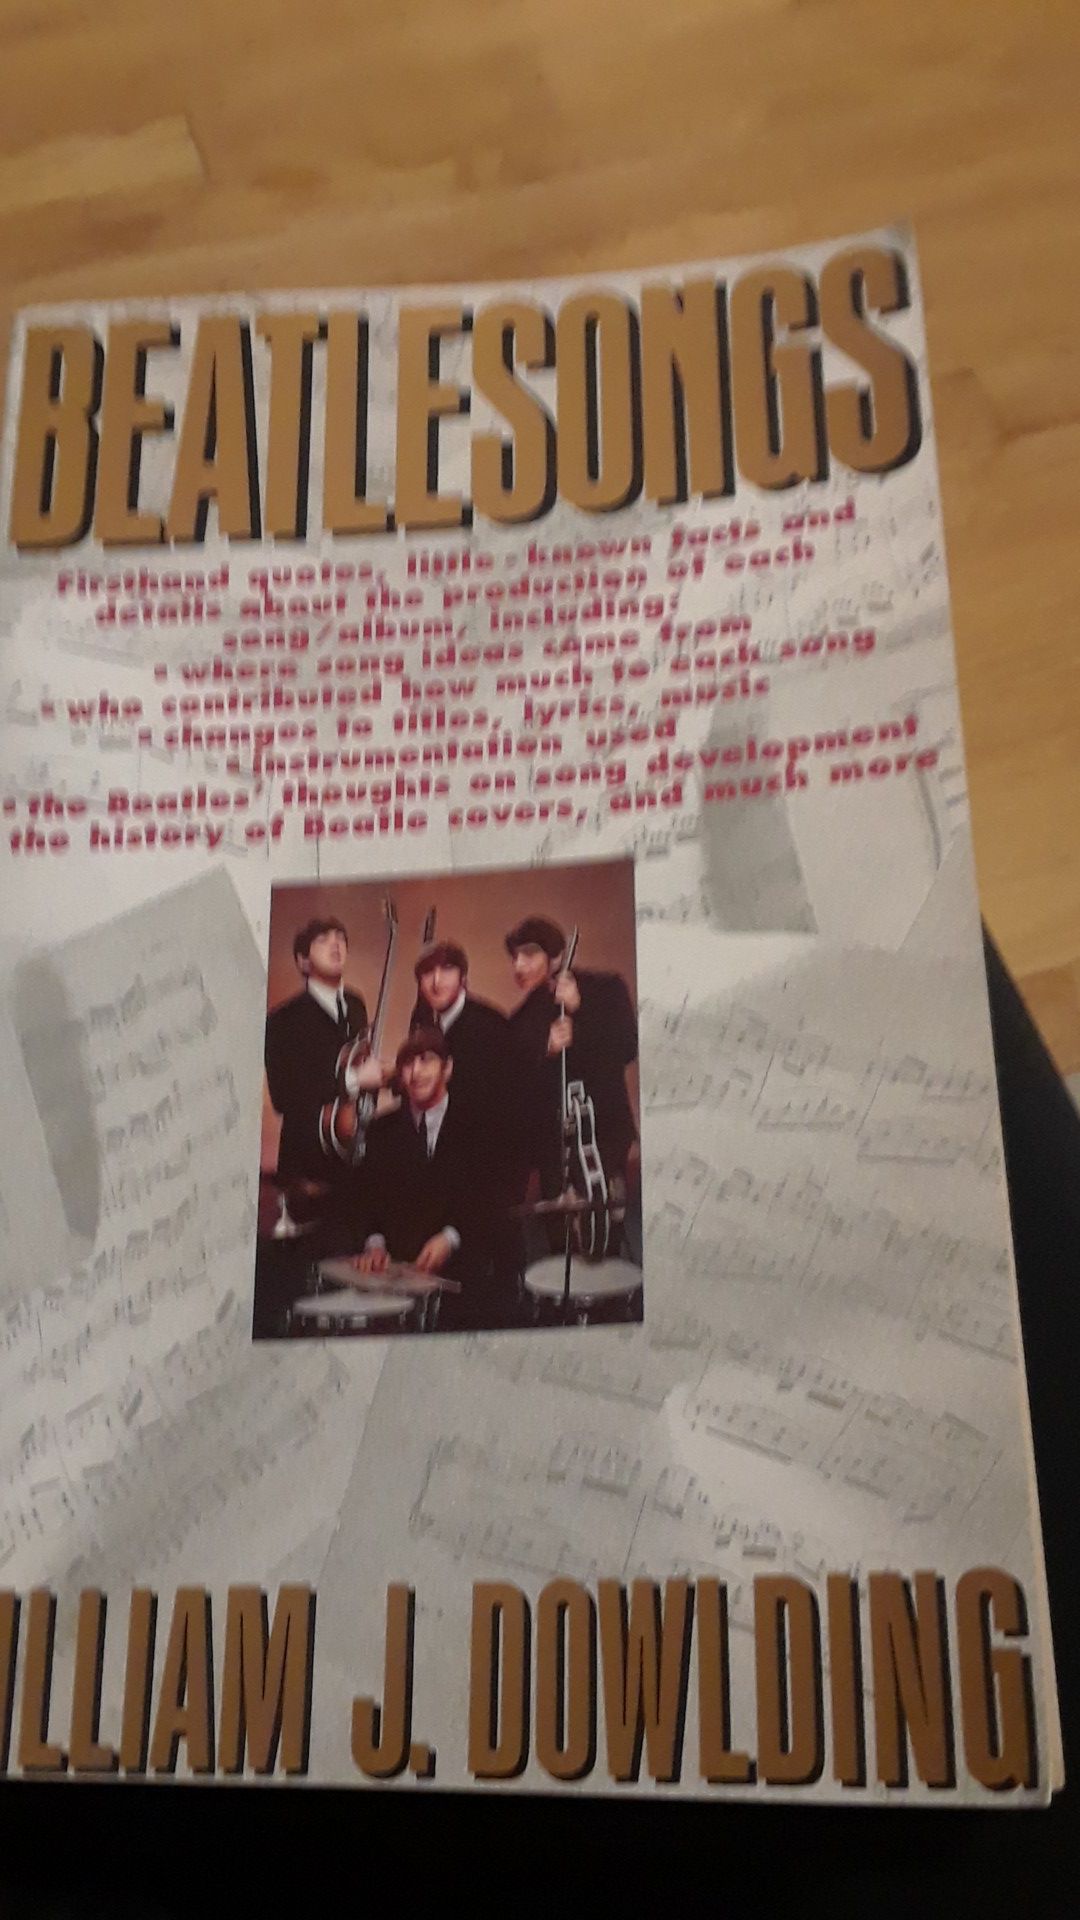 Beatle songs book, by william j. Dowlding.